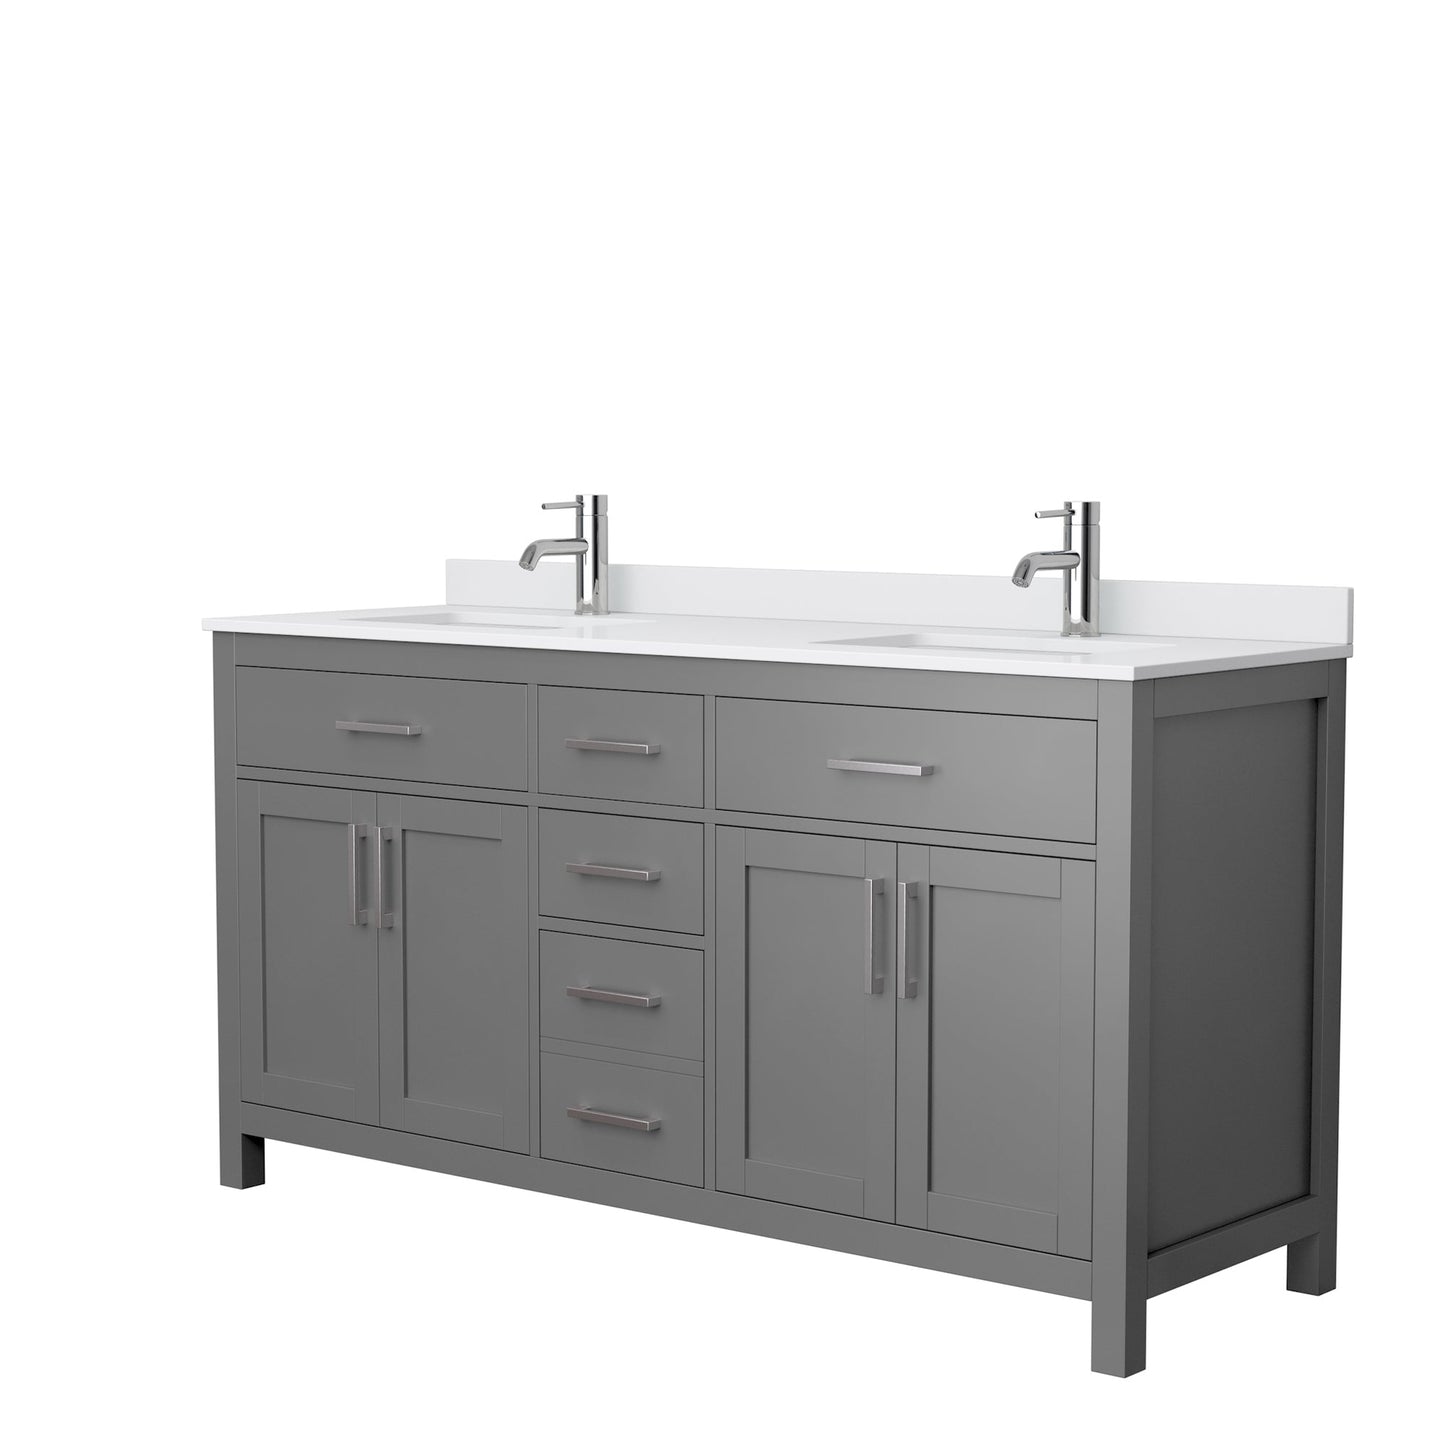 Wyndham Collection Beckett 66" Double Bathroom Dark Gray Vanity With White Cultured Marble Countertop, Undermount Square Sink And Brushed Nickel Trim